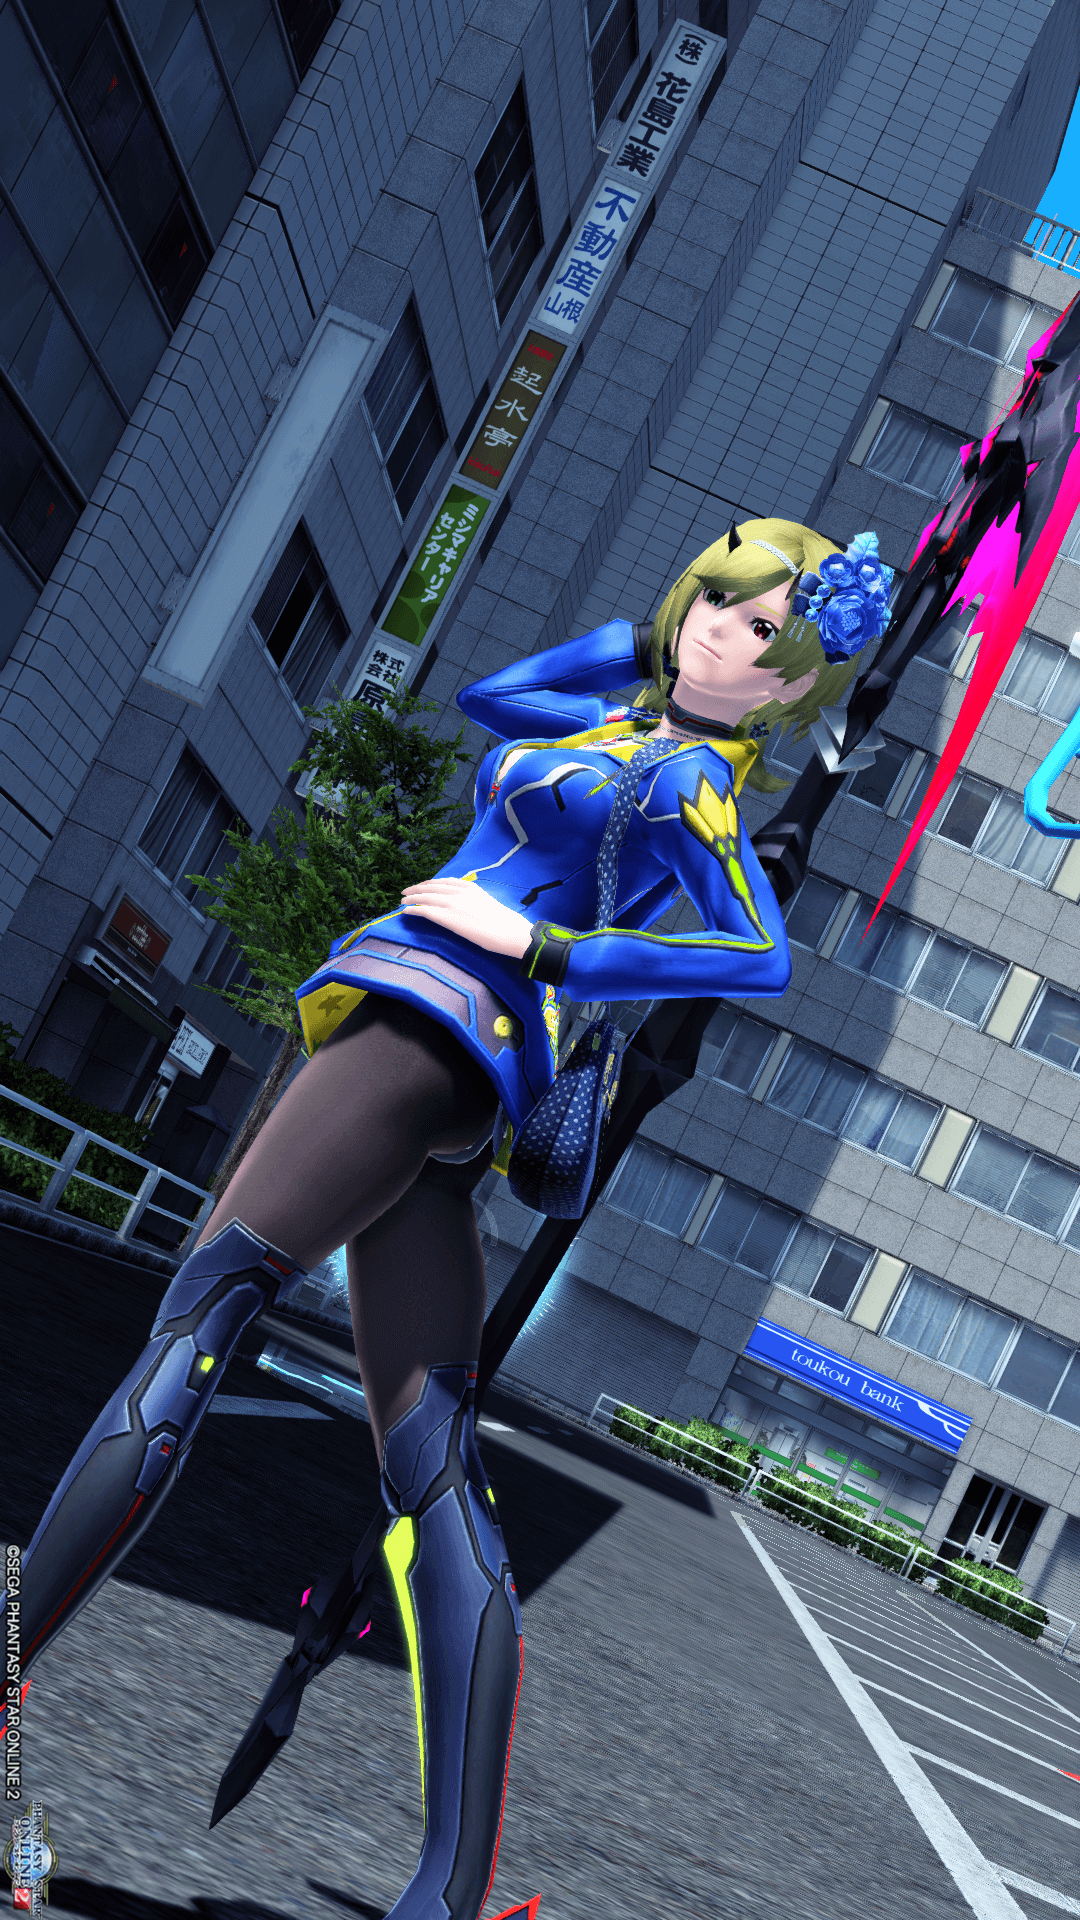 pso20160426_162100_000.png